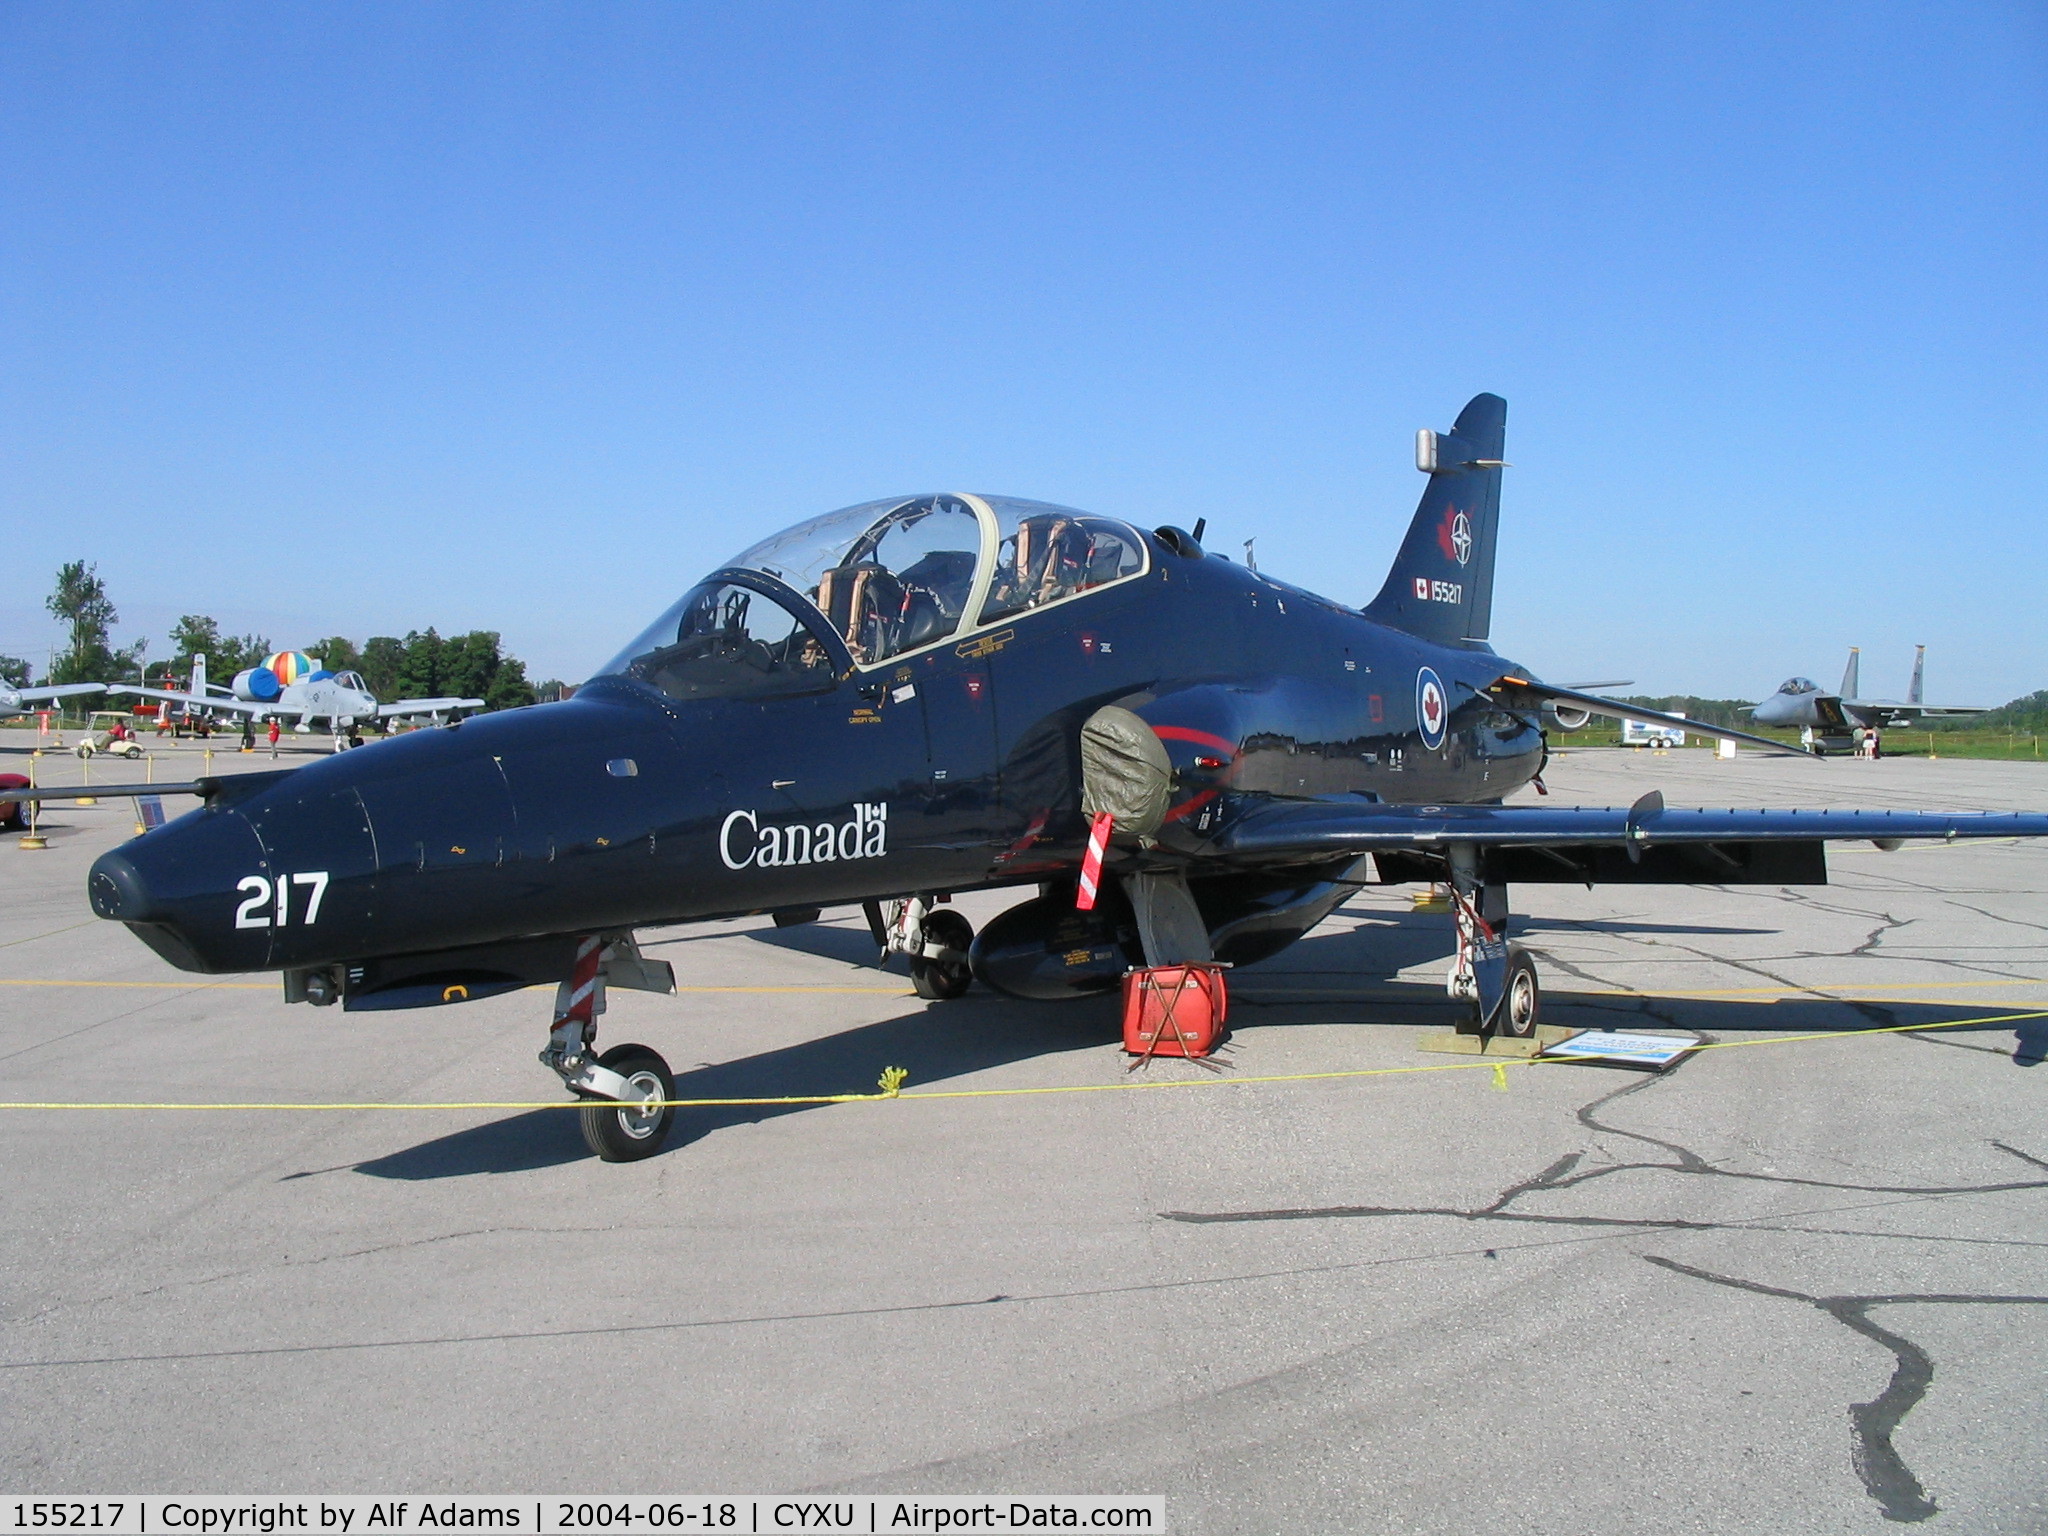 155217, 2001 BAe Systems CT-155 Hawk C/N IT025/711, Displayed at the airshow at London, Ontario, Canada in 2004.